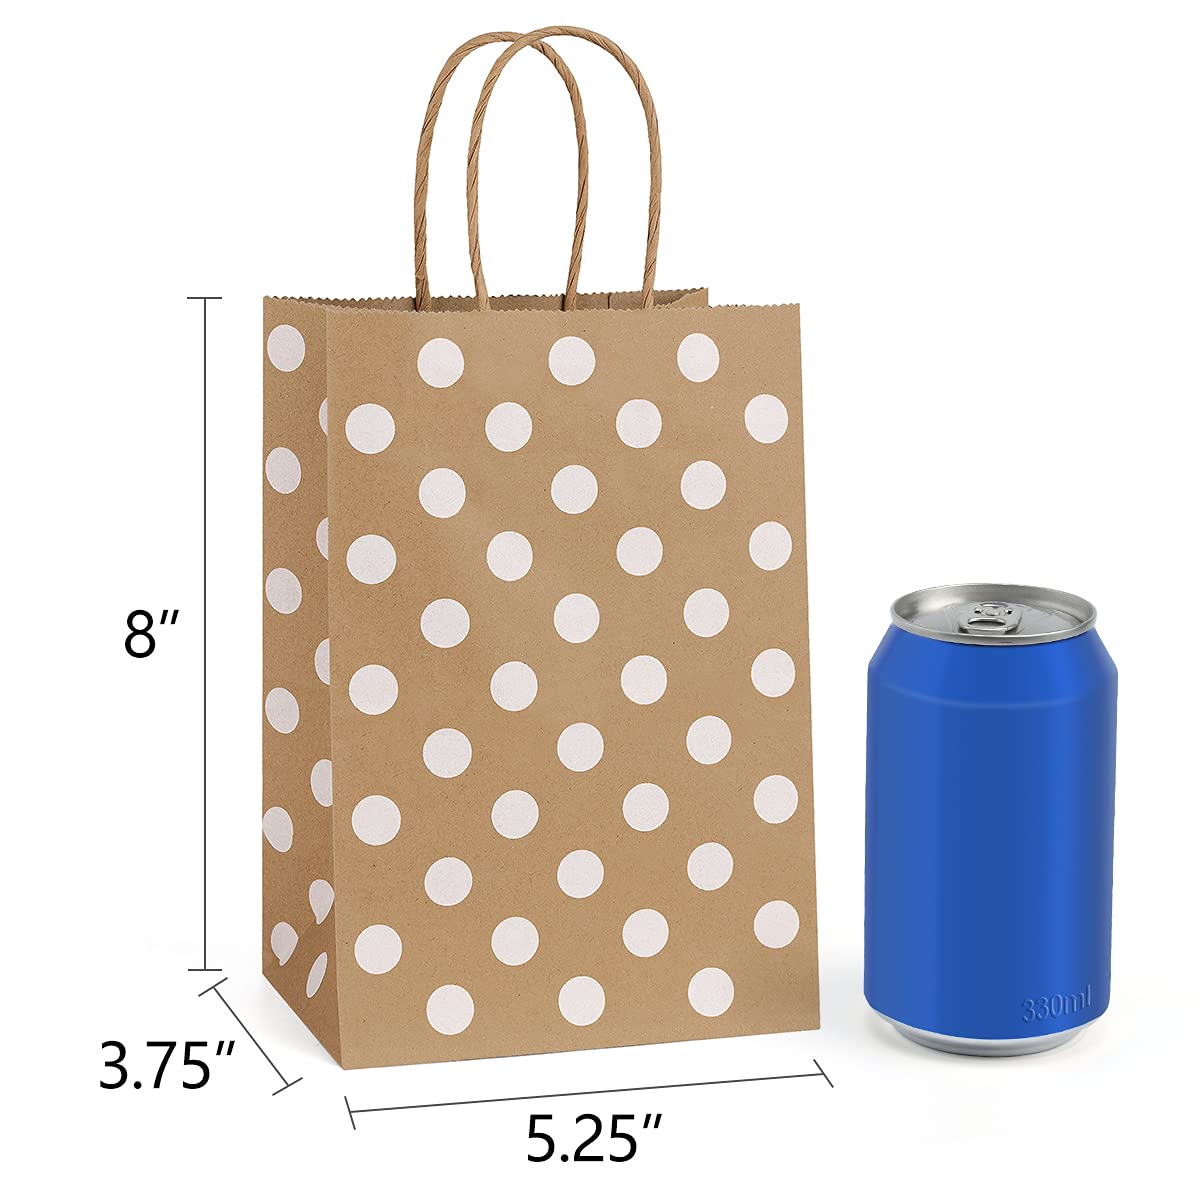 BagDream Small Paper Gift Bags 25Pcs 5.25x3.75x8 Inches Kraft Paper Bags with Handles, Paper Shopping Bags Party Bags Recyclable Kraft Bags Brown Dot Party Bags